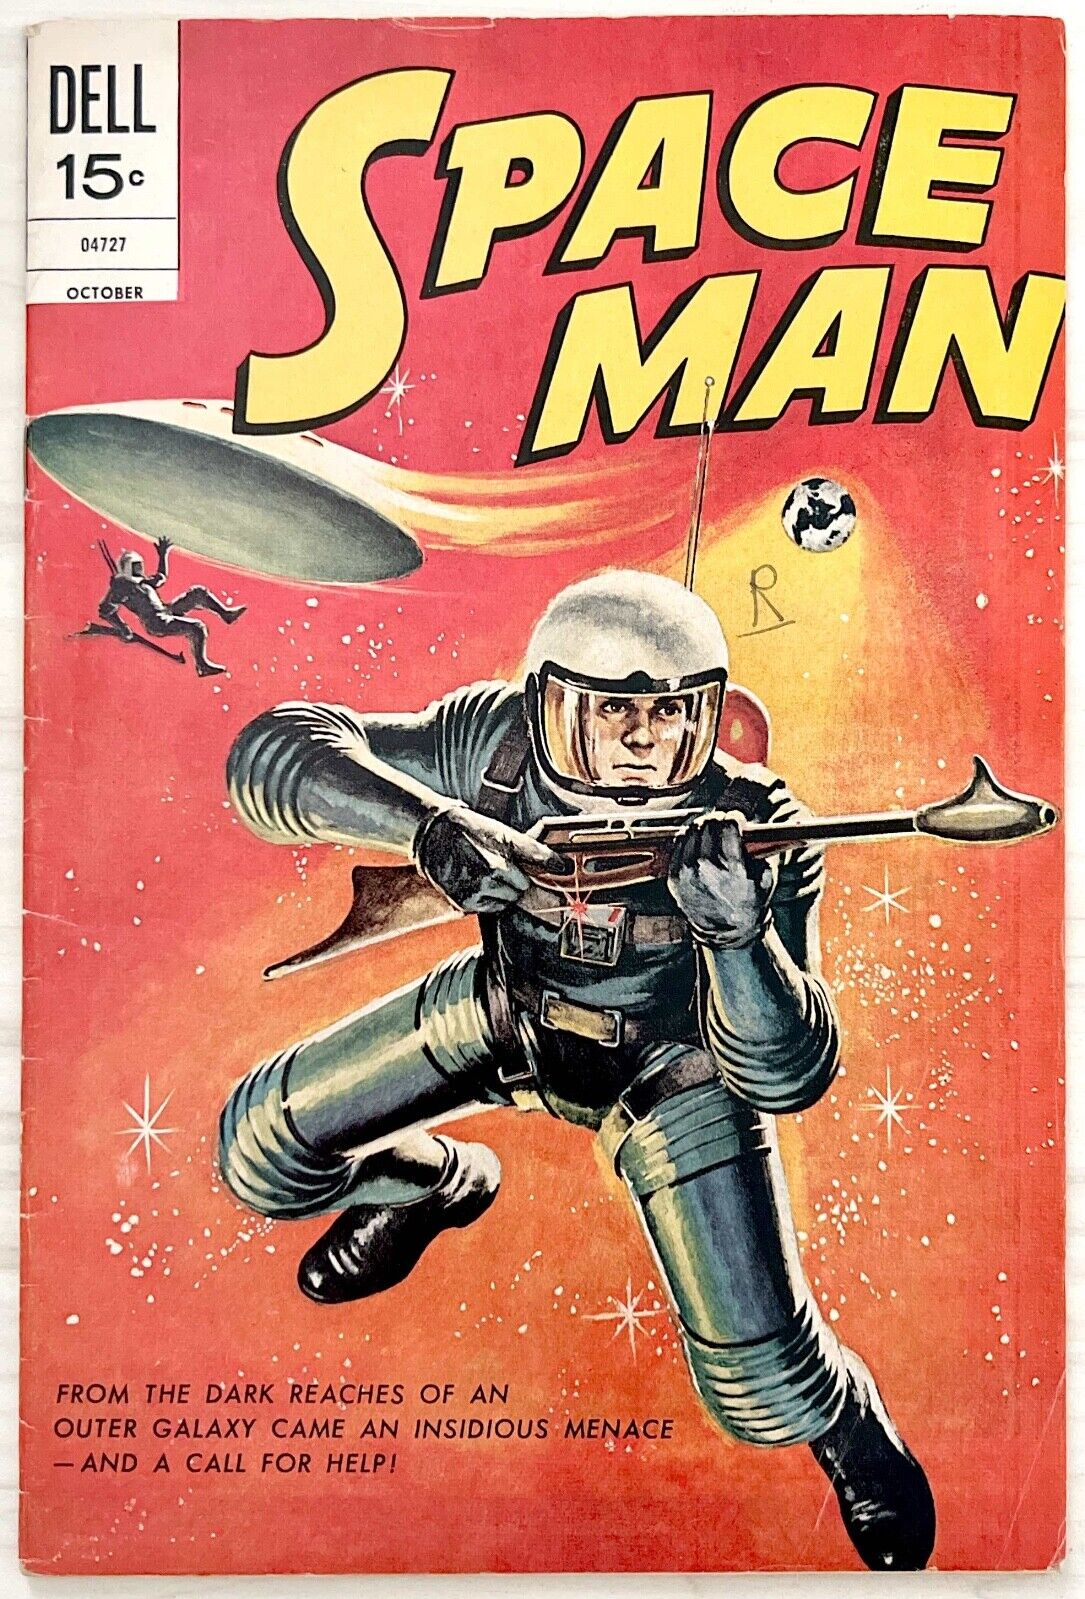 Space Man (1972), No. 10, Dell Publishing Co.